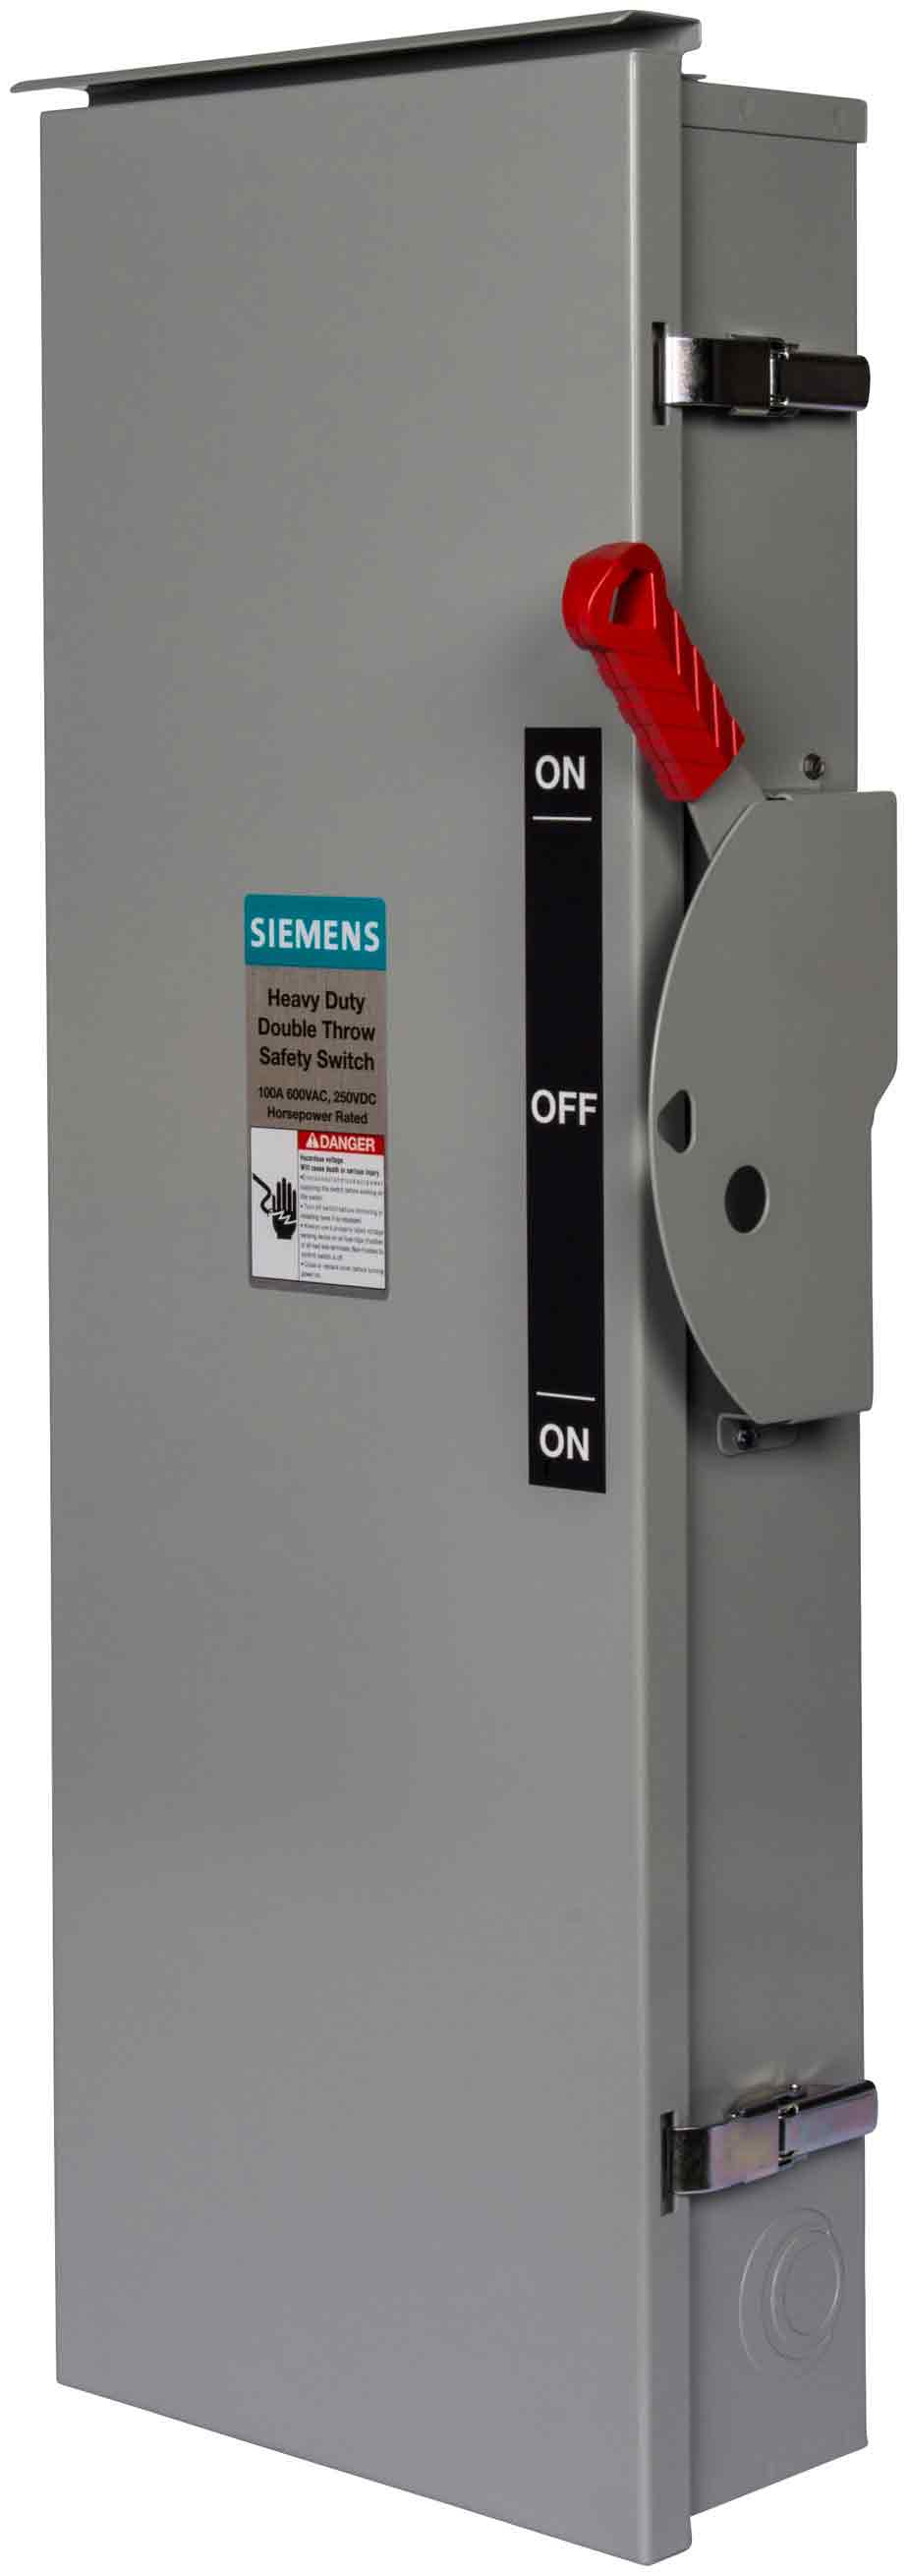 DTNF321 - Siemens - 30 Amp Disconnect Safety Switches